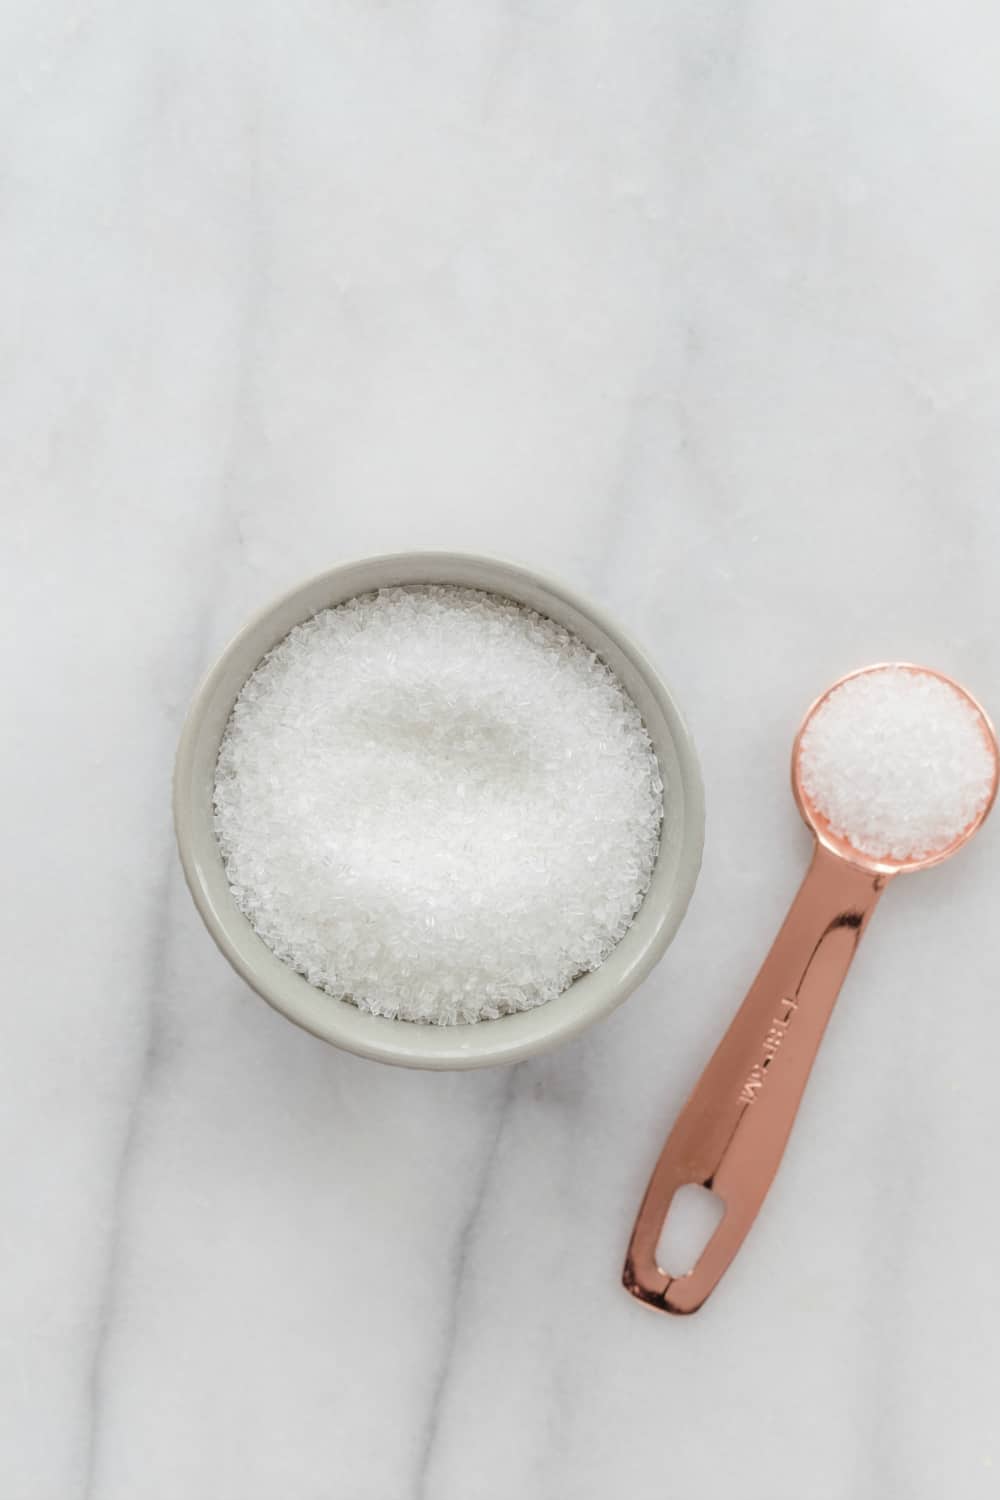 Sugar is one of the most important baking ingredients we use. Find out the difference between the types of sugar, including coarse sugar.